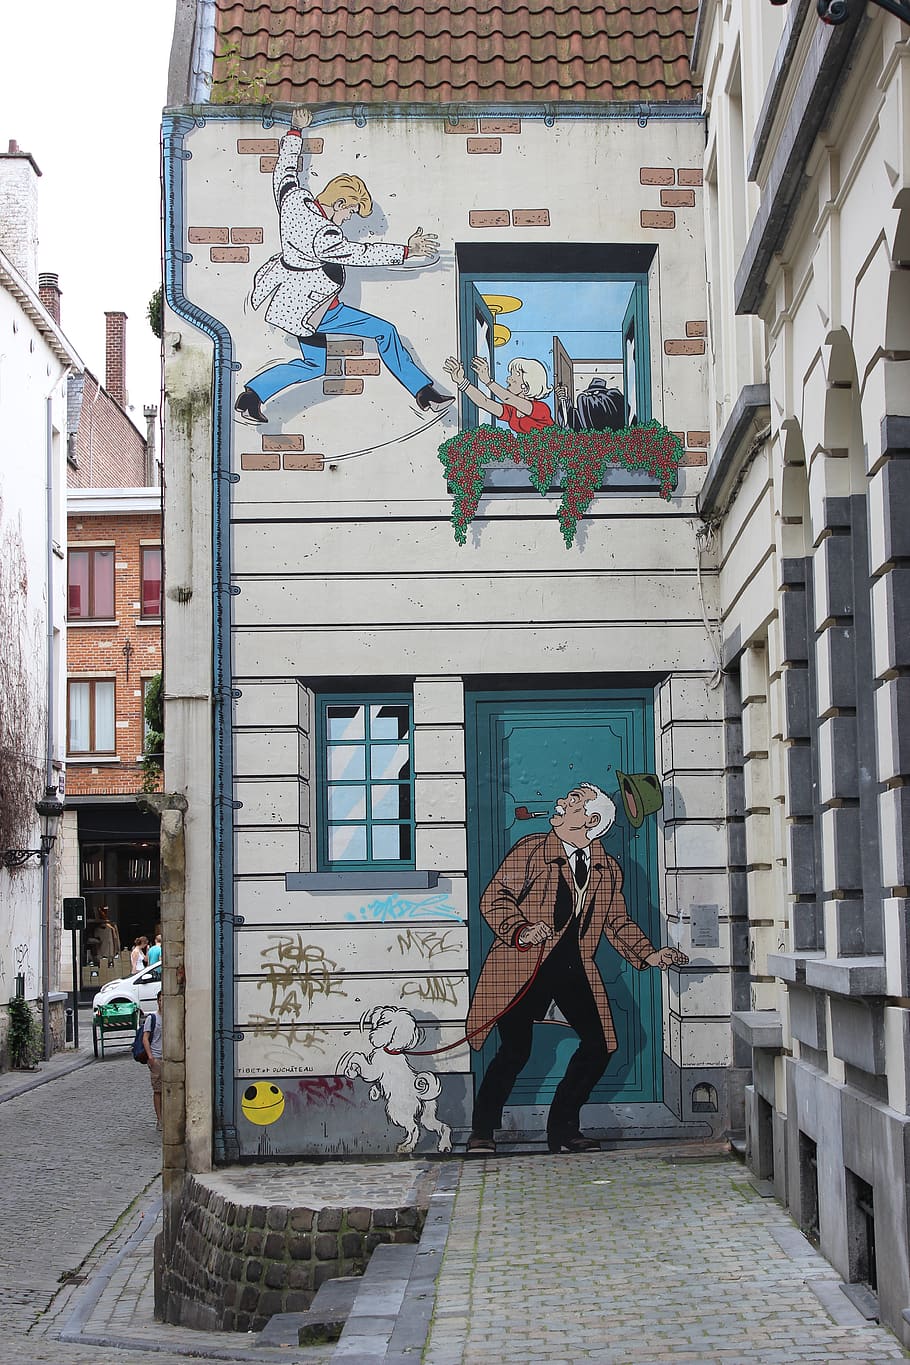 painted wall, comic, street art, facade paint, brussels, building exterior, architecture, built structure, real people, full length